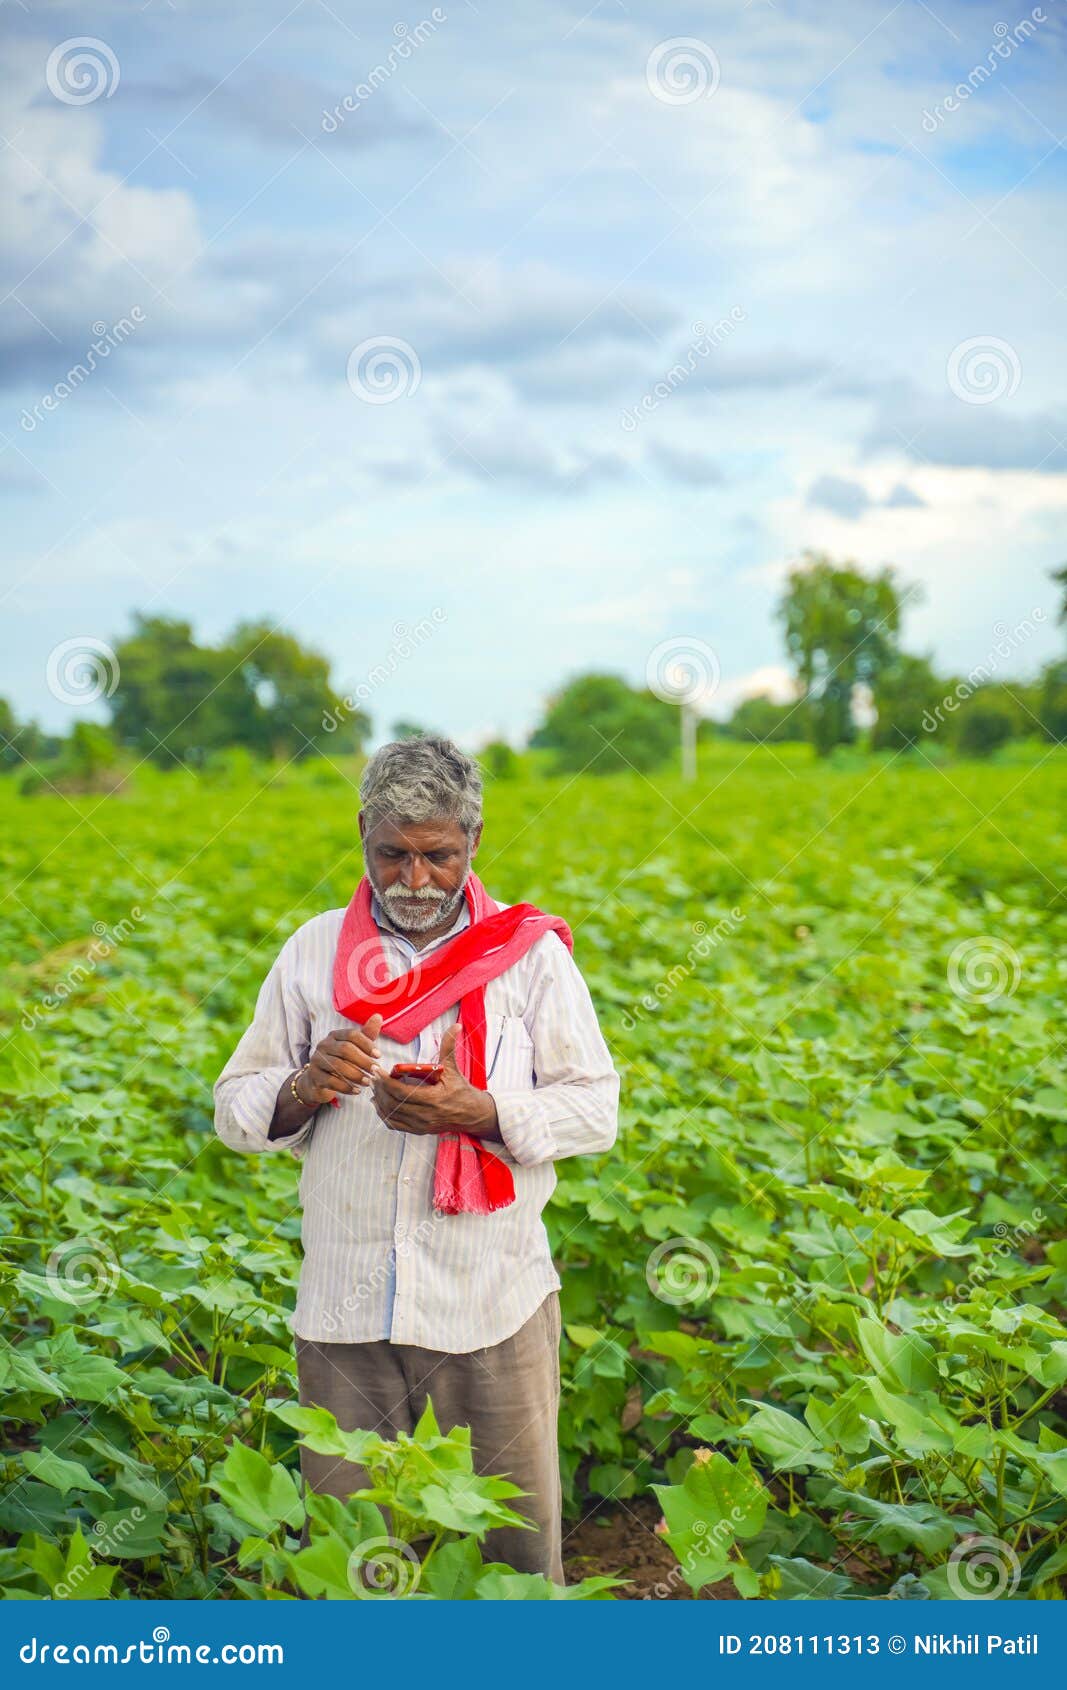 Indian Farmer Using Mobile Phone At Agriculture Field Stock Image